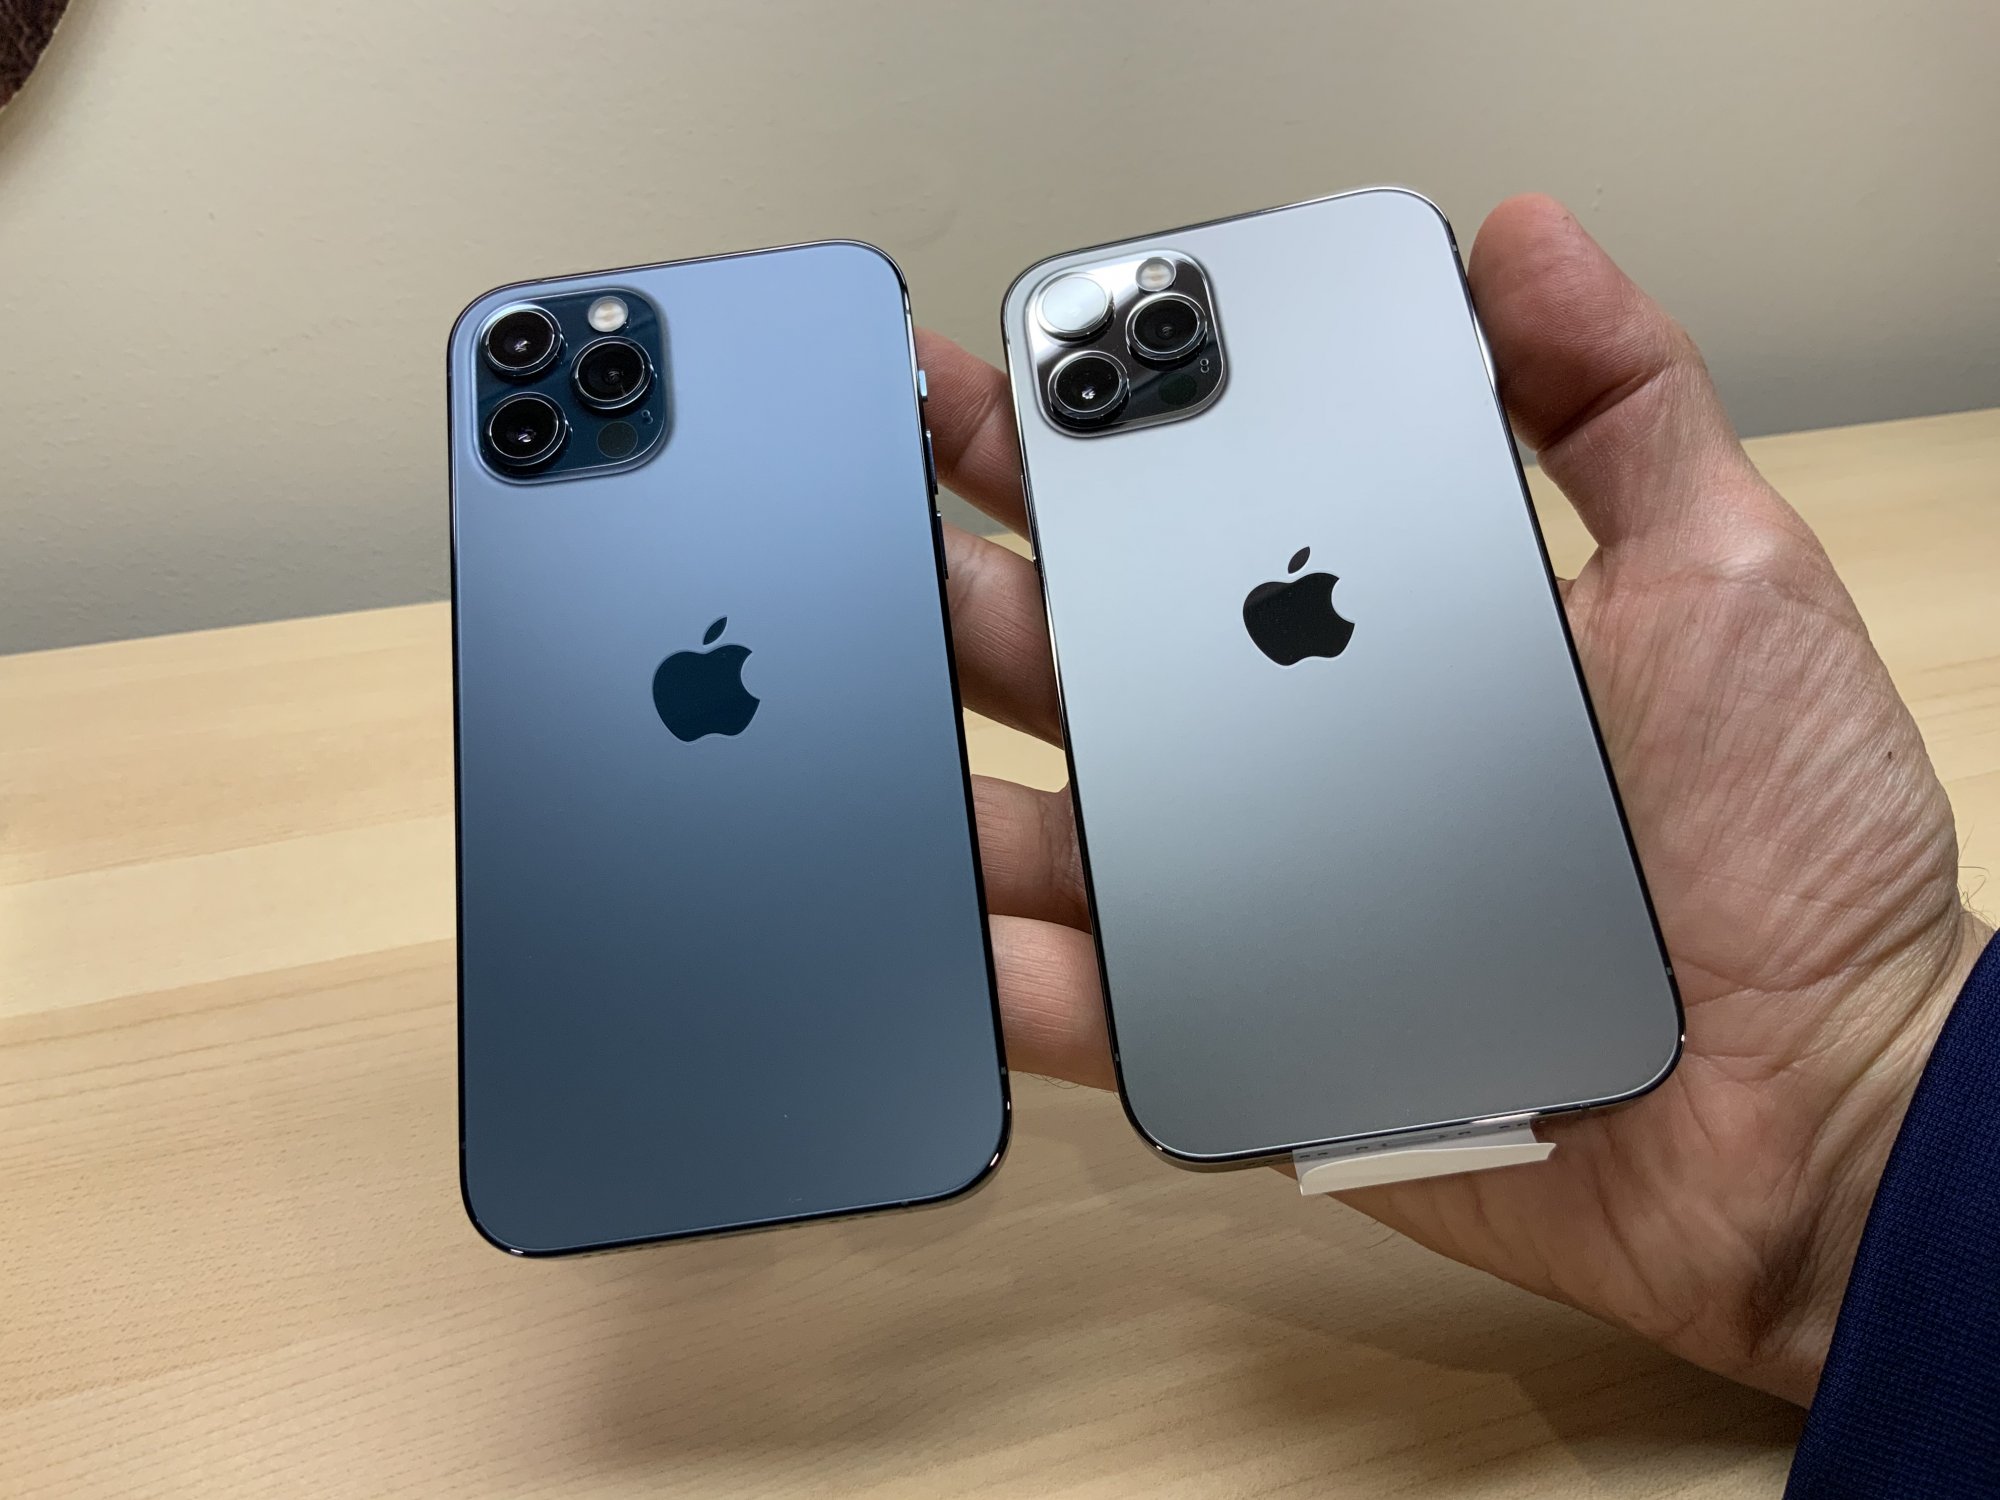 Why I went with Graphite over Pacific Blue. | Page 2 | MacRumors Forums